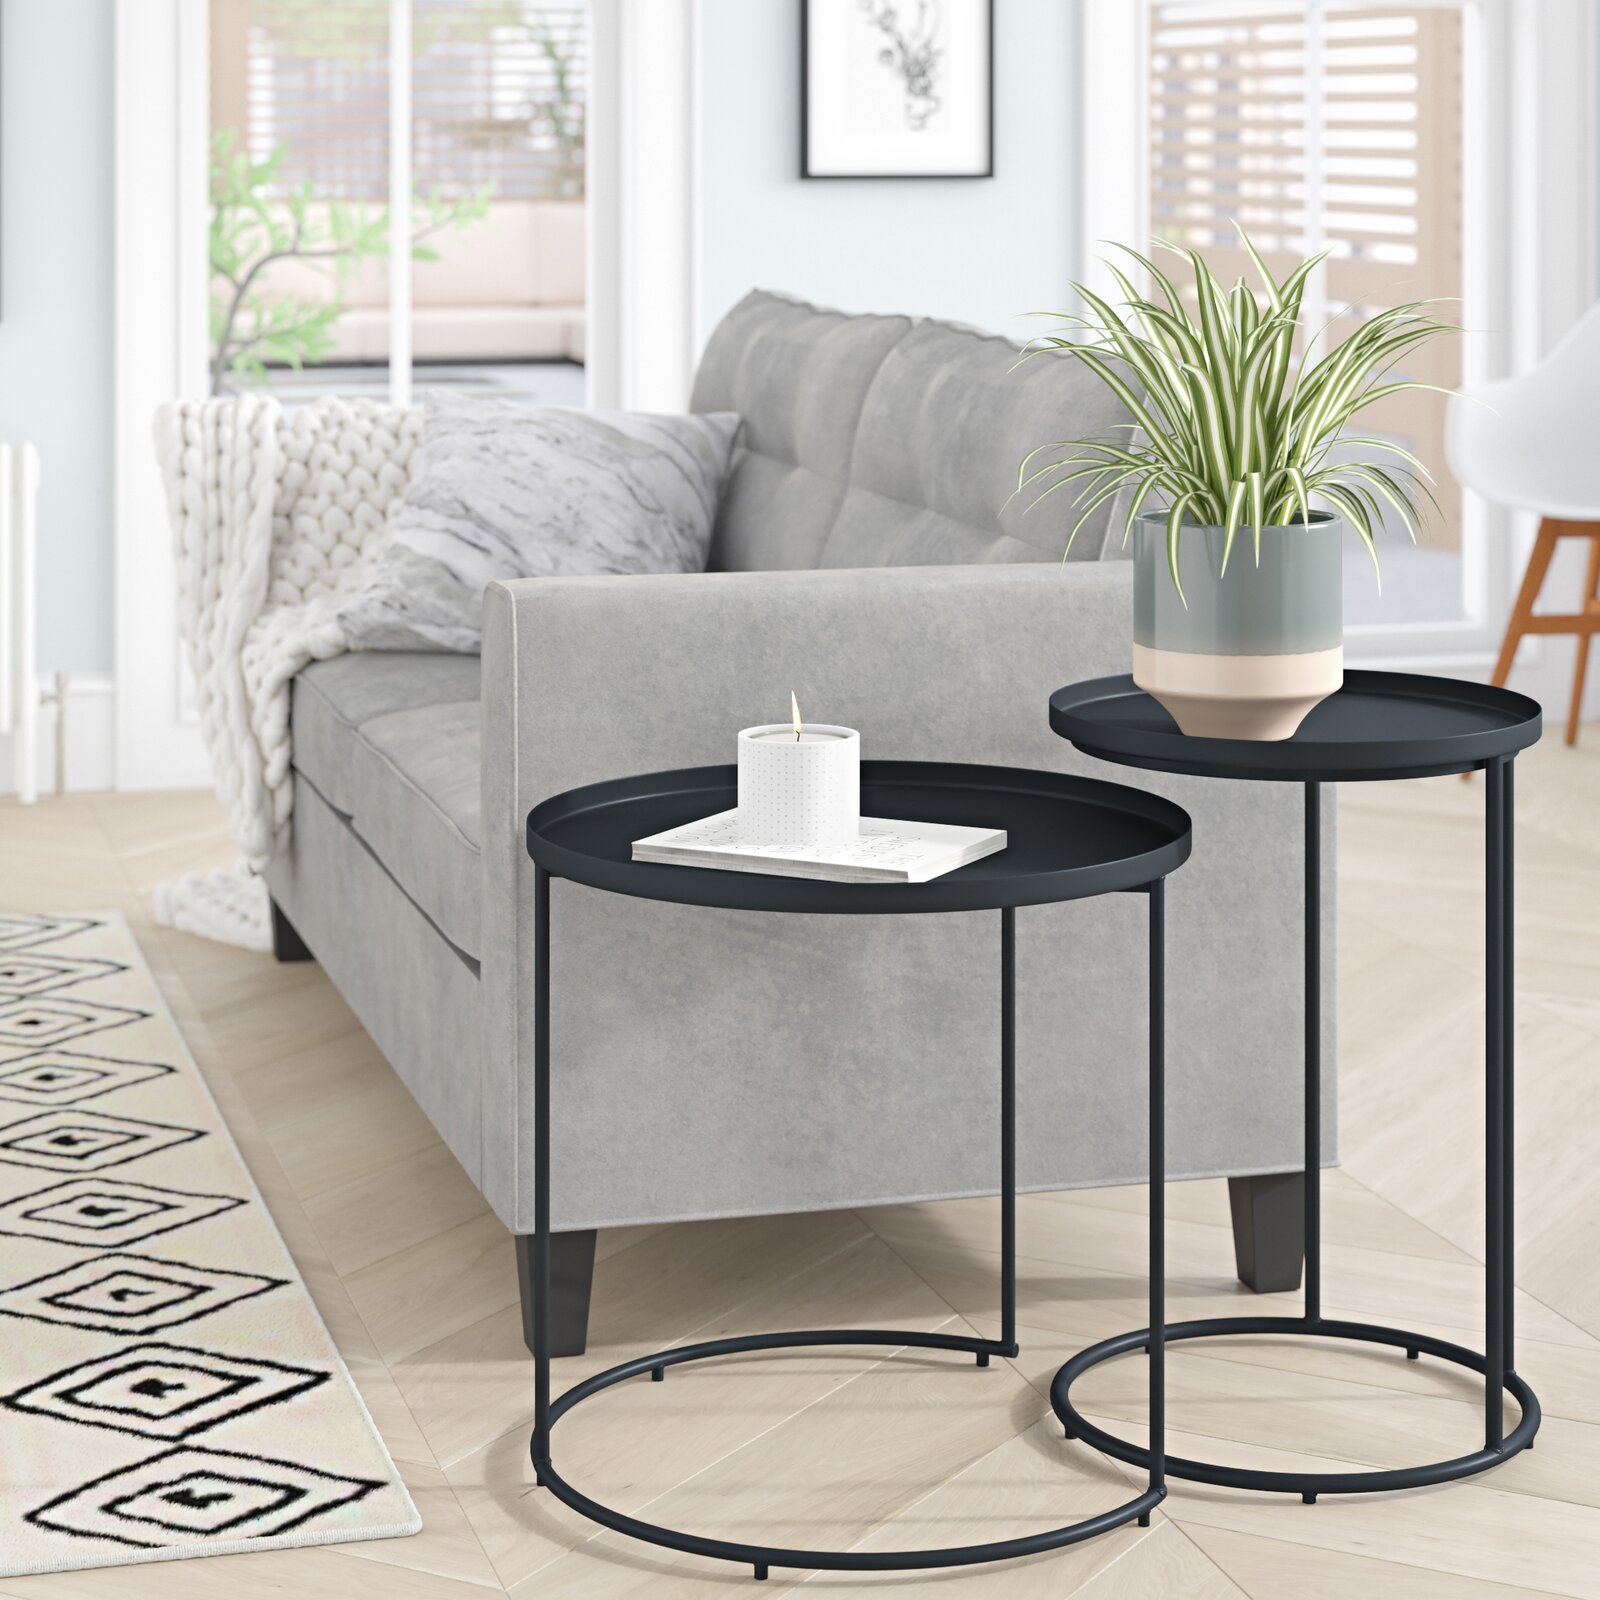 Higuchi Tray Top C Table Nesting Tables - Image 1